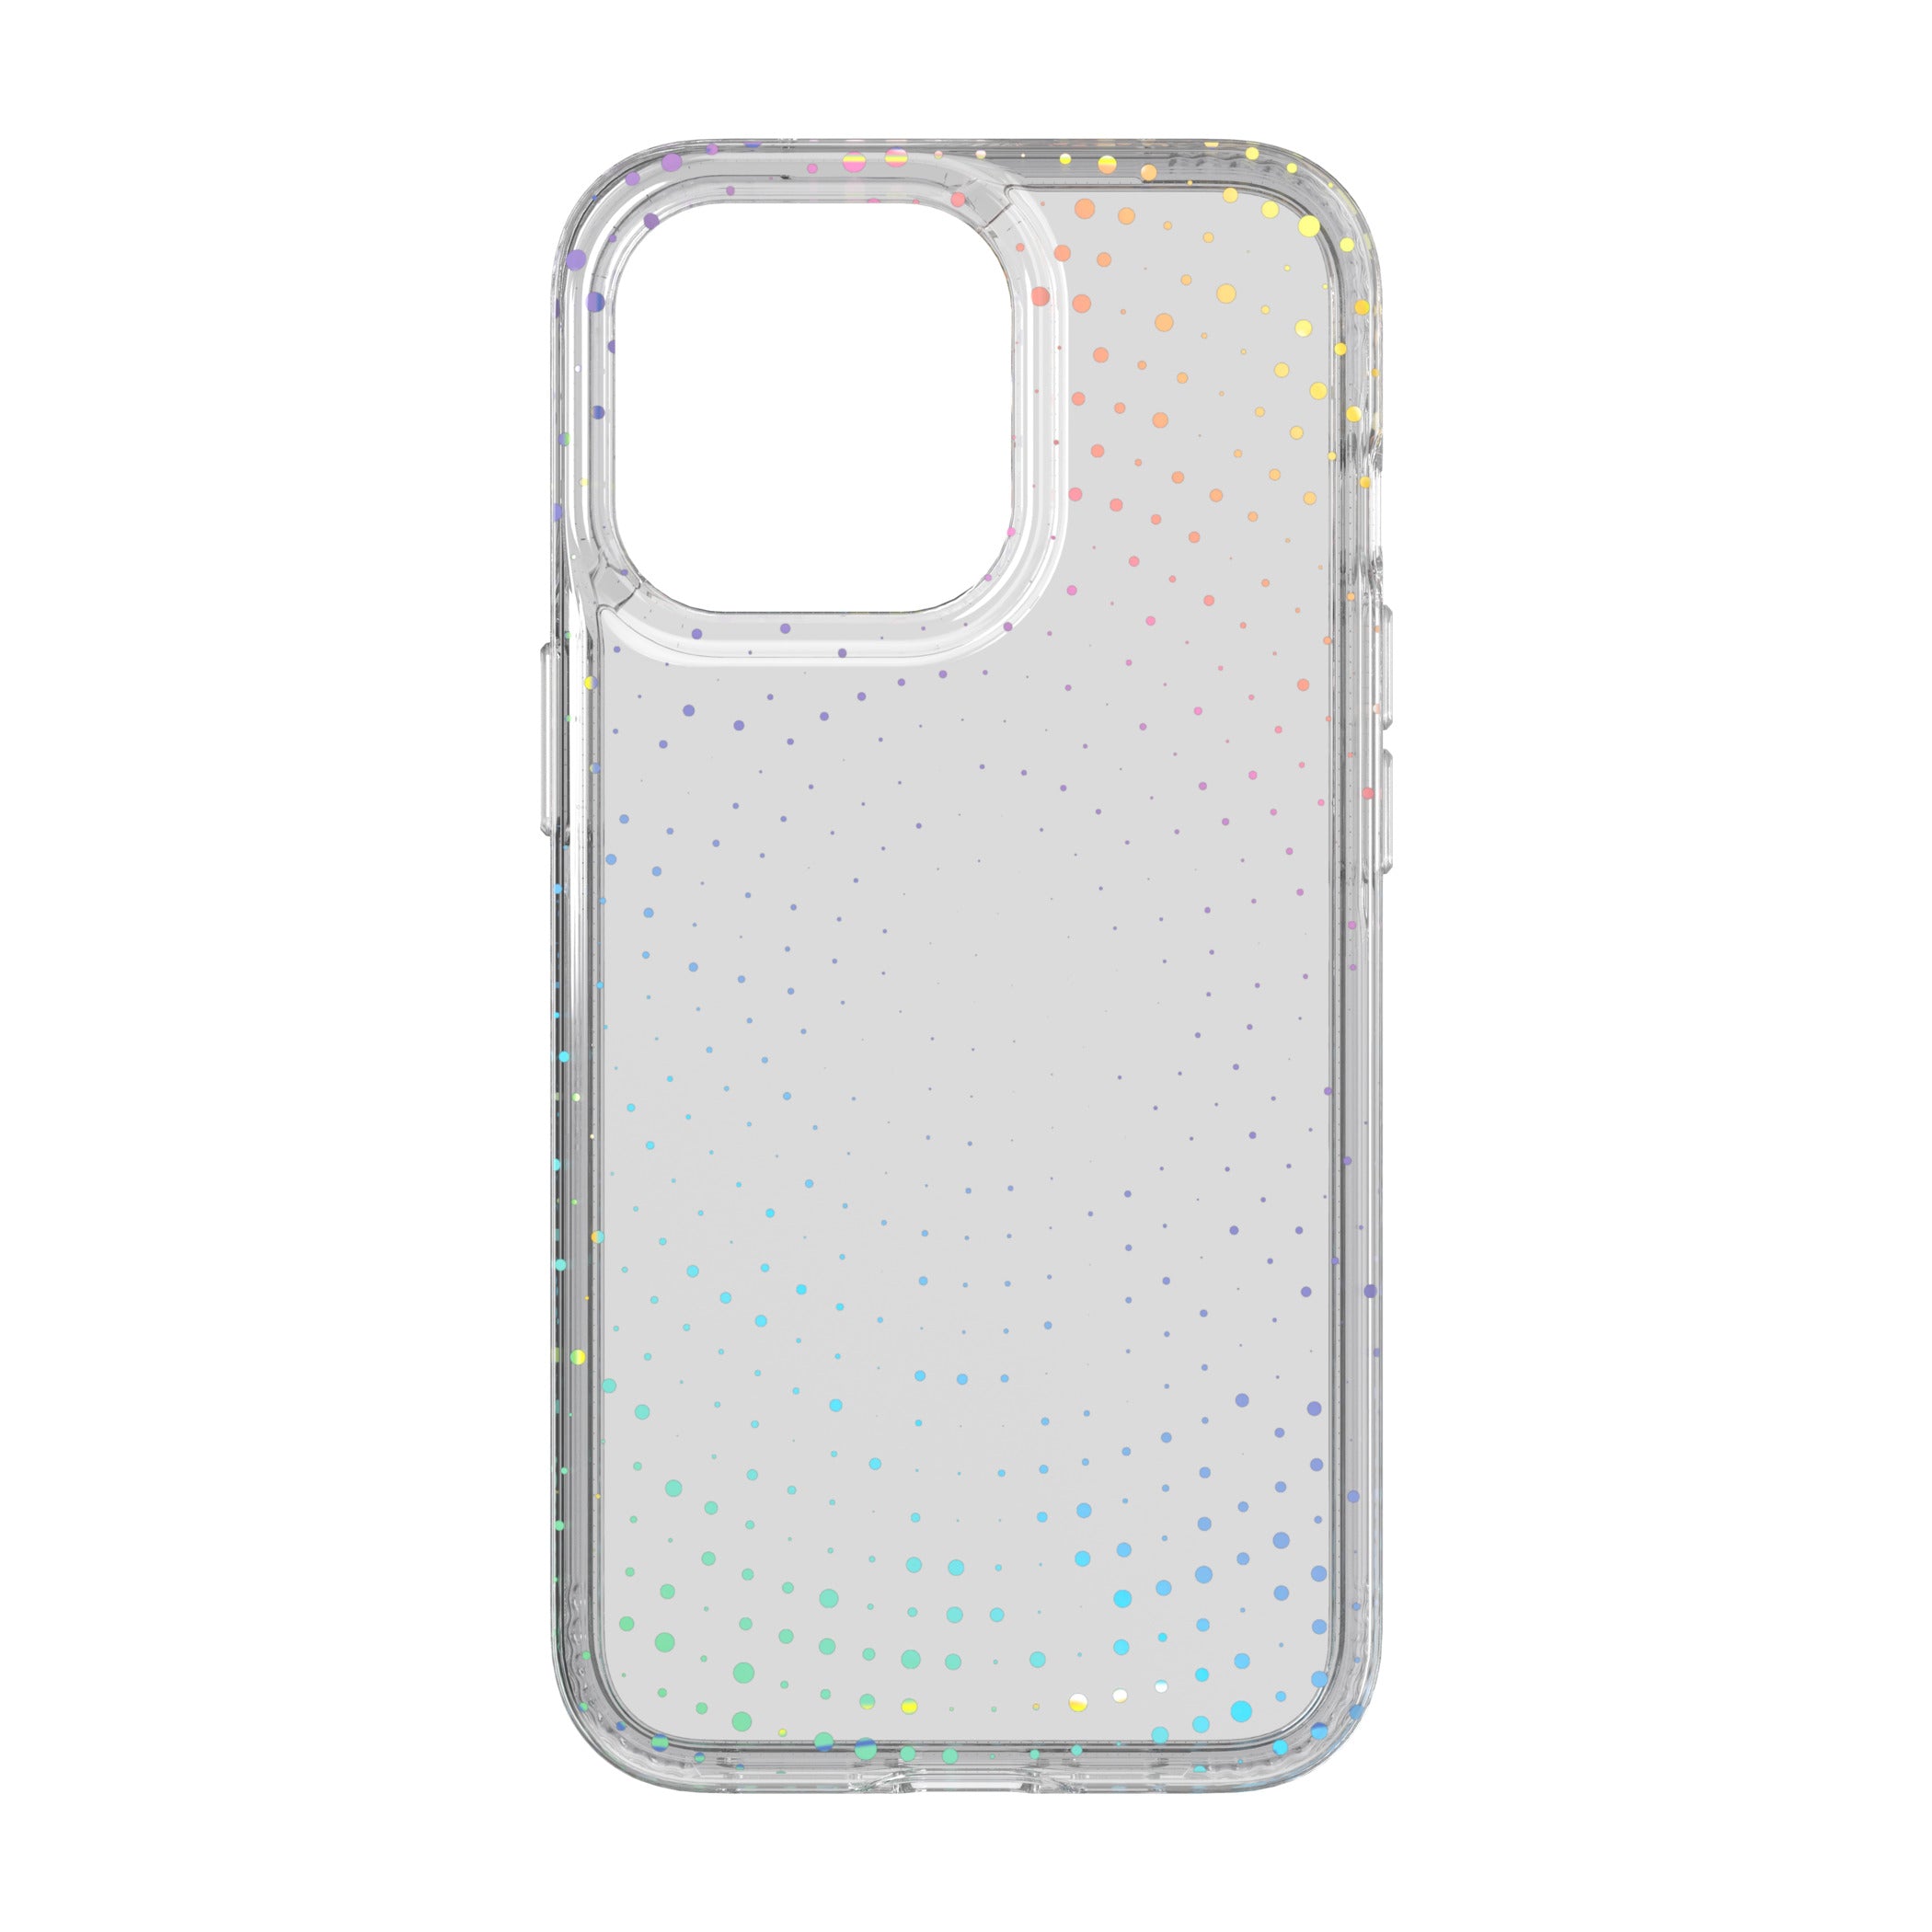 Tech21 Evo Sparkle Phone Case for iPhone 13 Pro - Iridescent.